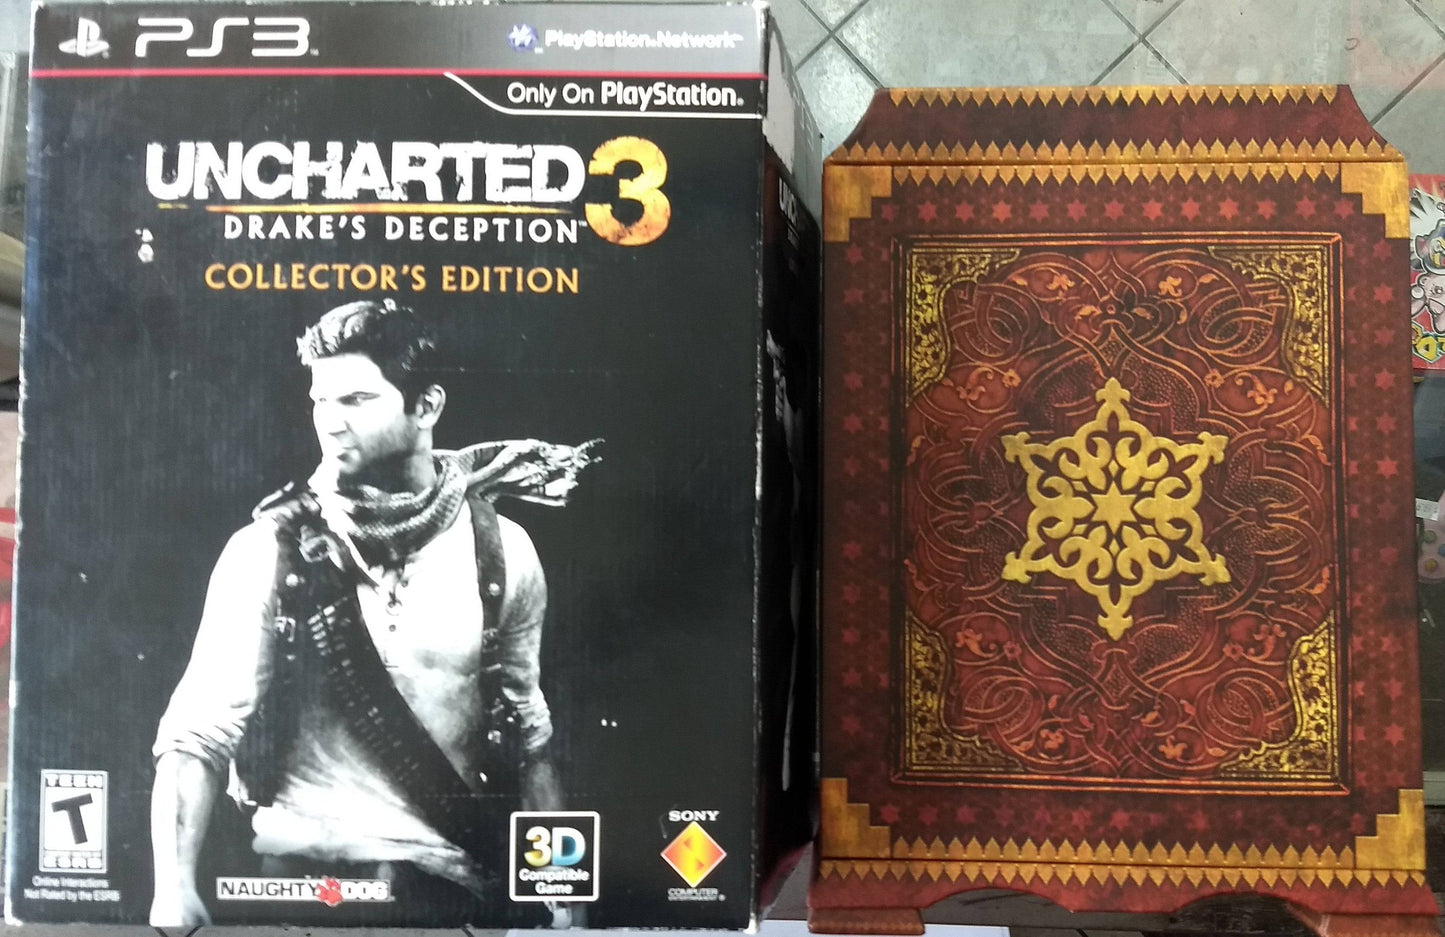 UNCHARTED 3: DRAKES DECEPTION COLLECTOR'S EDITION (PLAYSTATION 3 PS3) - jeux video game-x